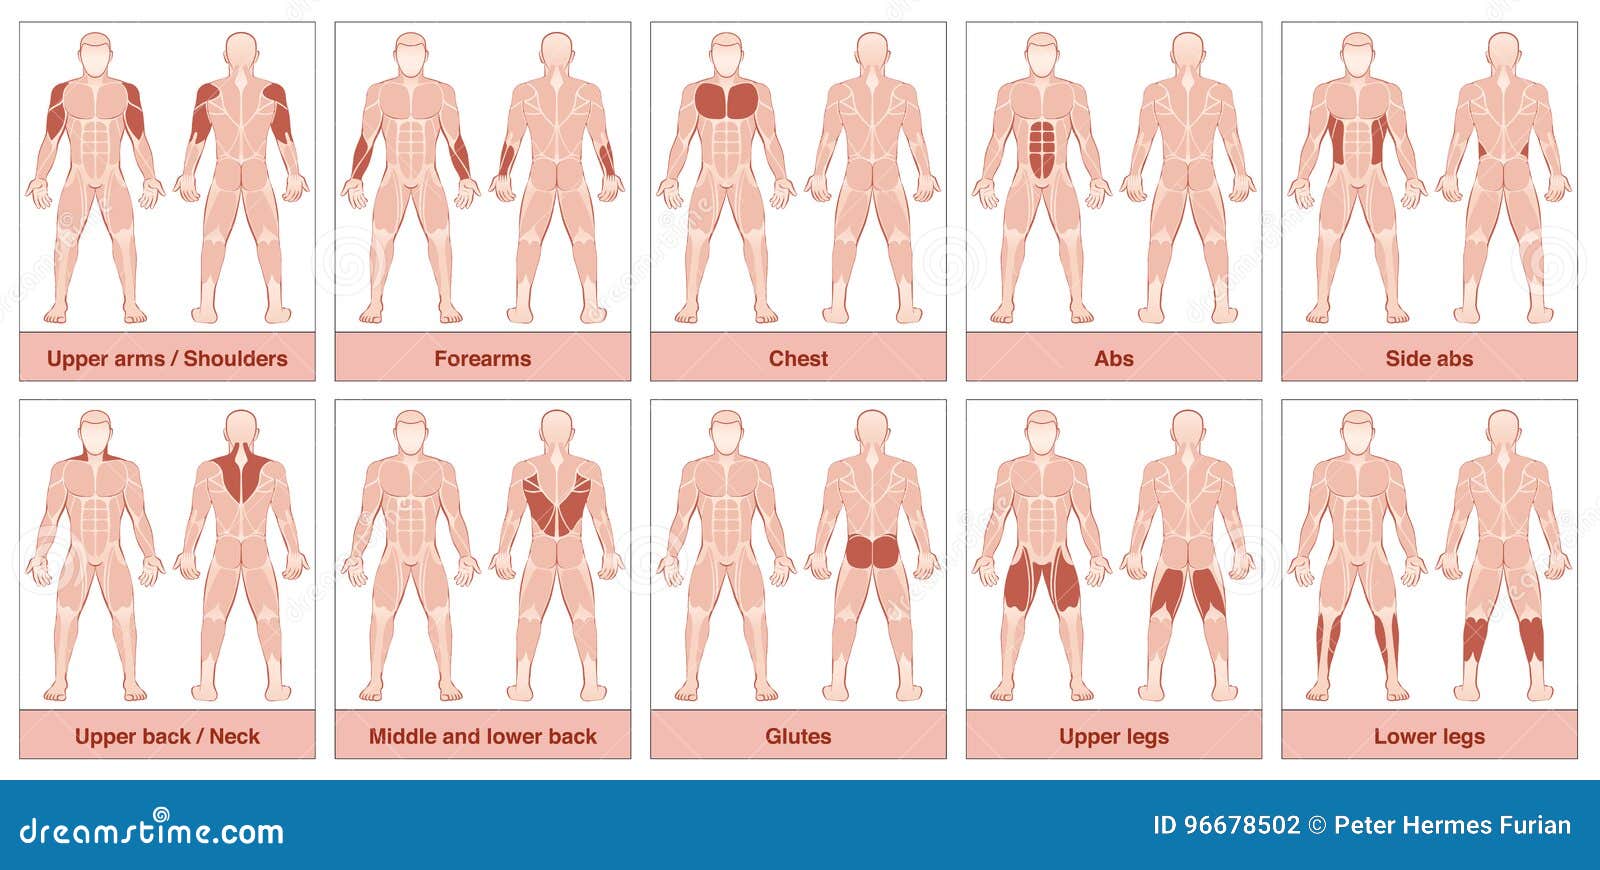 muscle groups chart